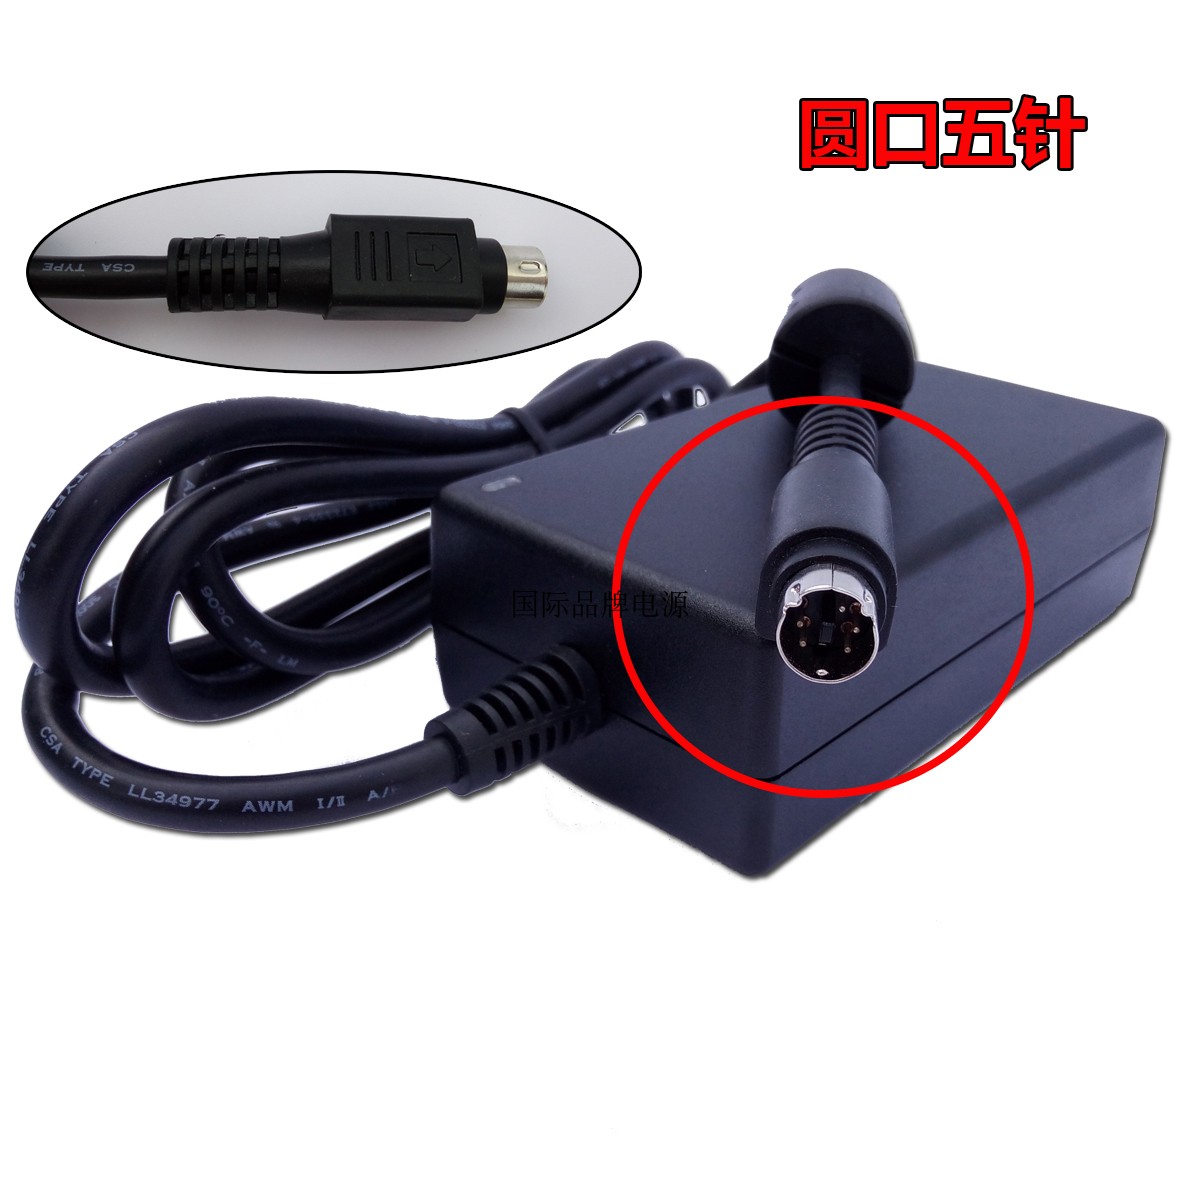 Keshuo 3.5 inch hard disk box power adapter serial port parallel hard disk box power cord 5V2A 12V2A 5-pin Pictures are - Click Image to Close